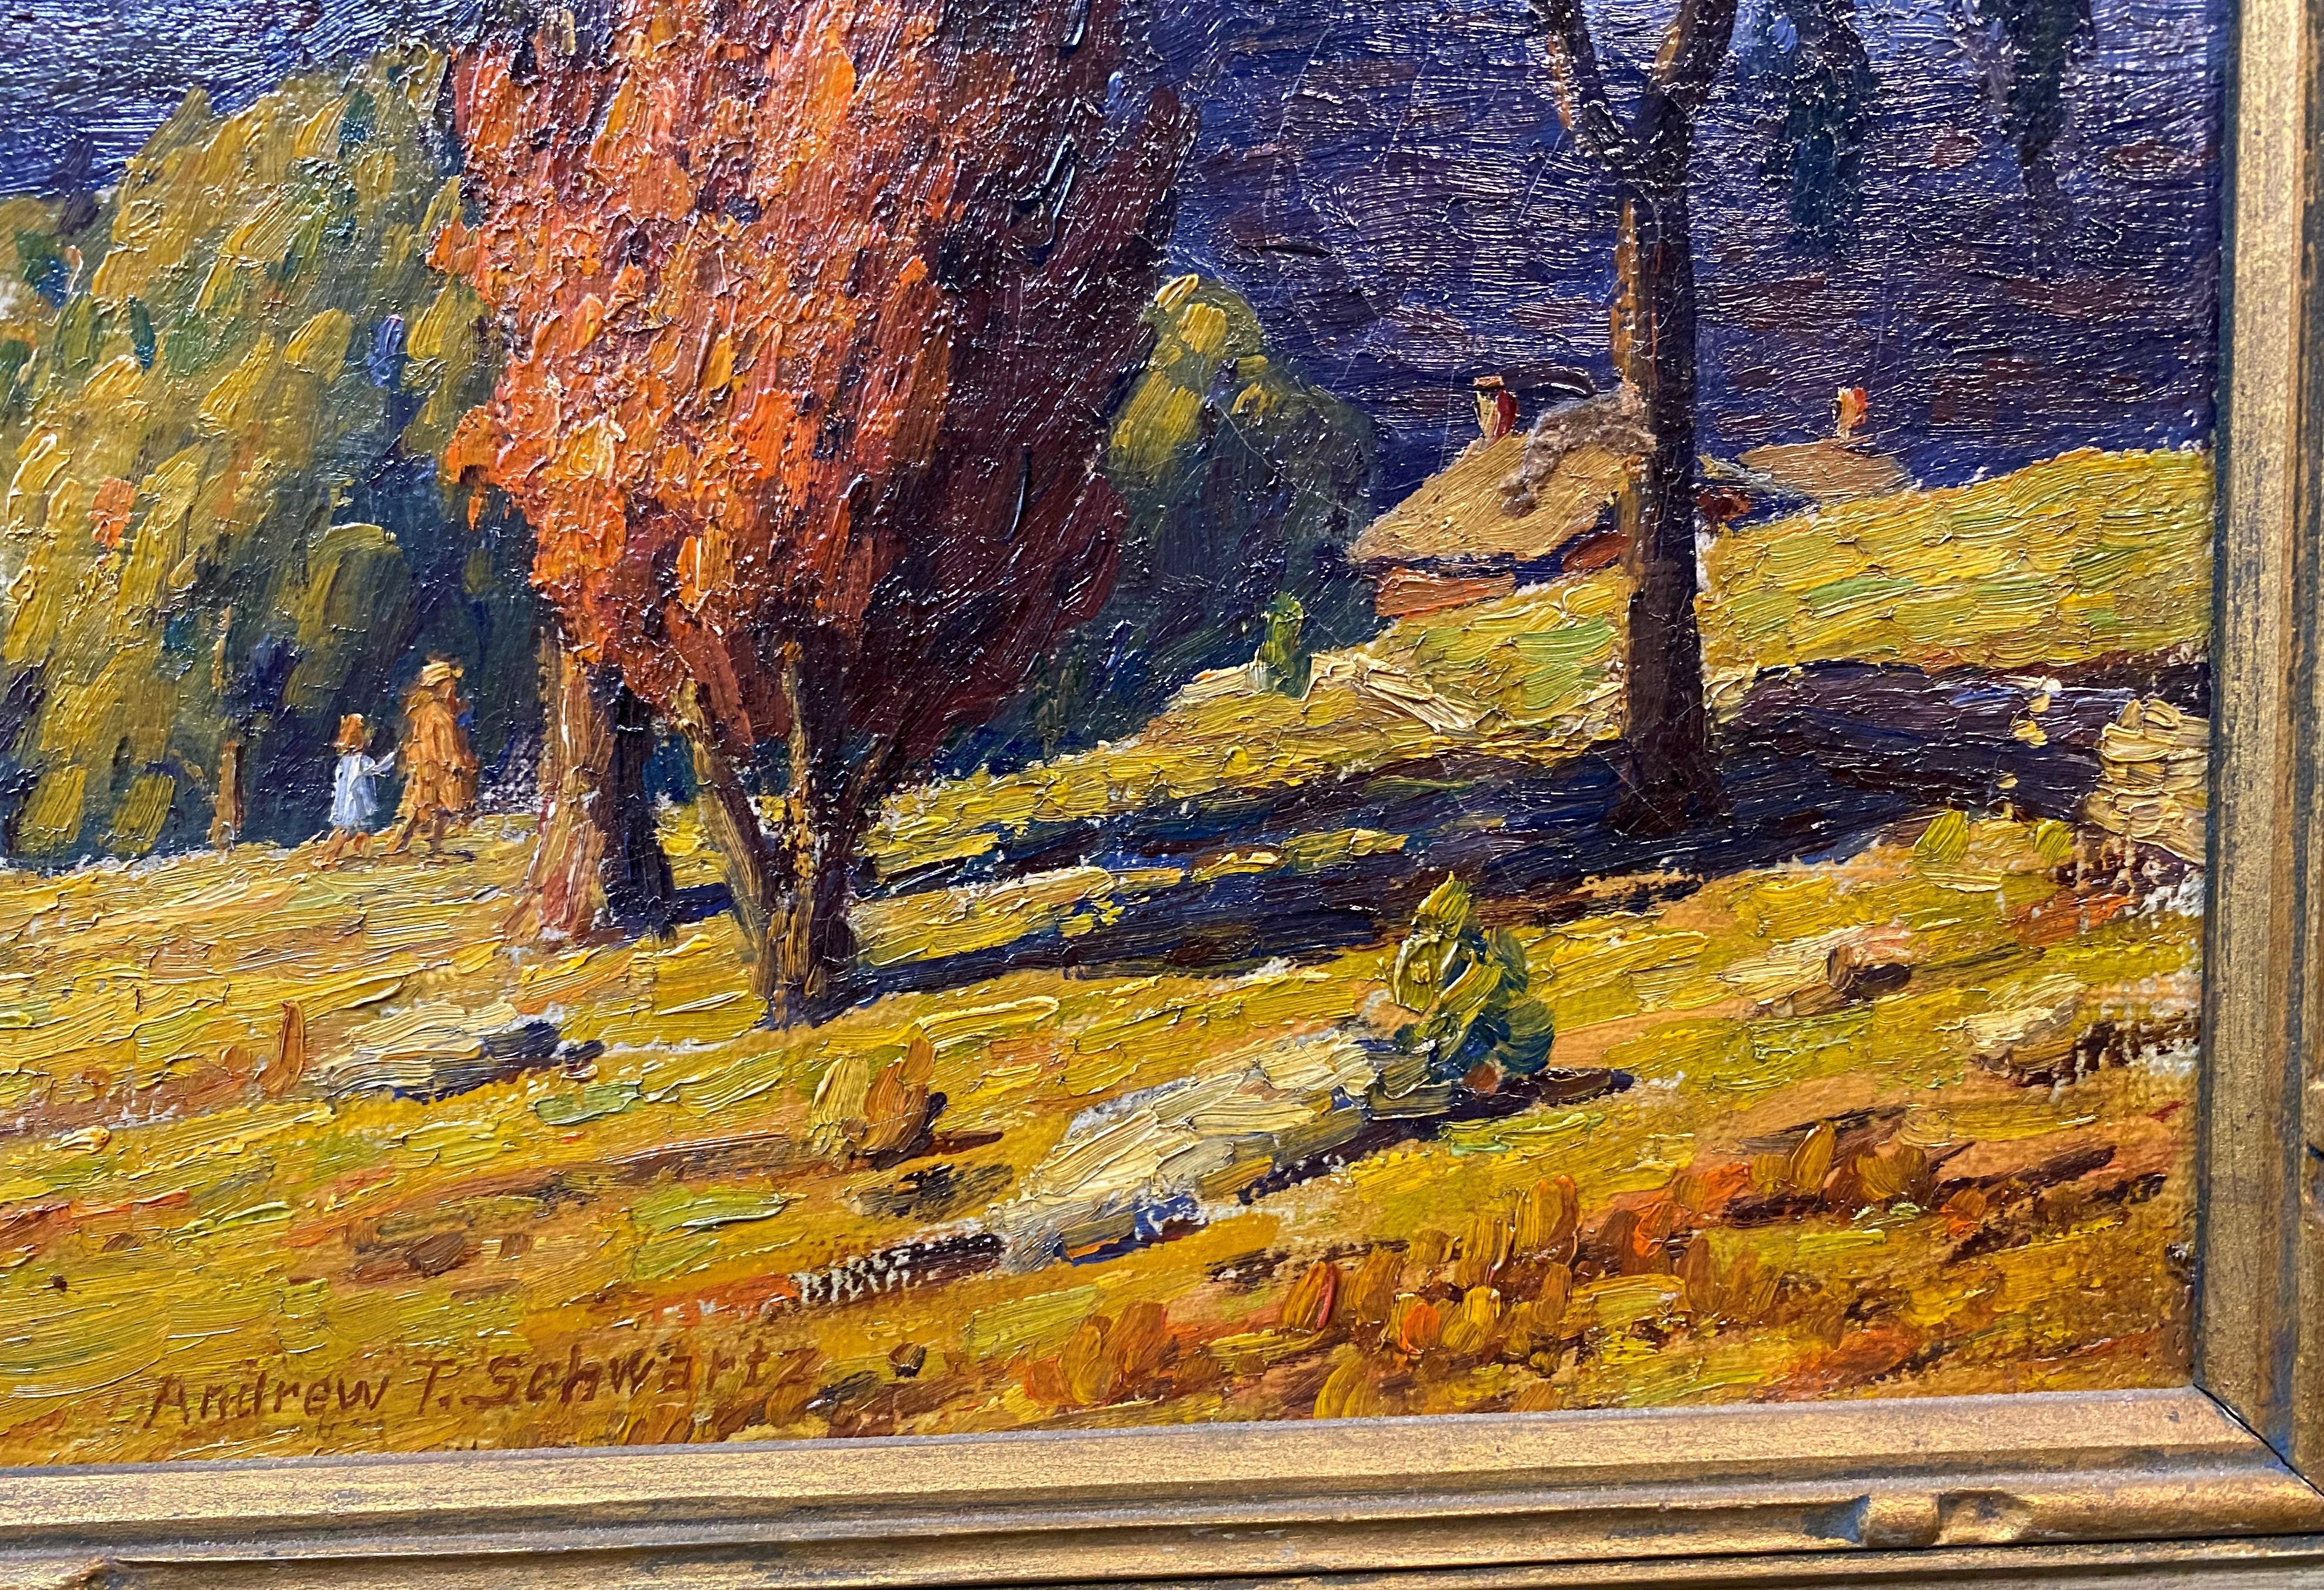 Autumn Landscape - American Impressionist Painting by Andrew Thomas Schwartz